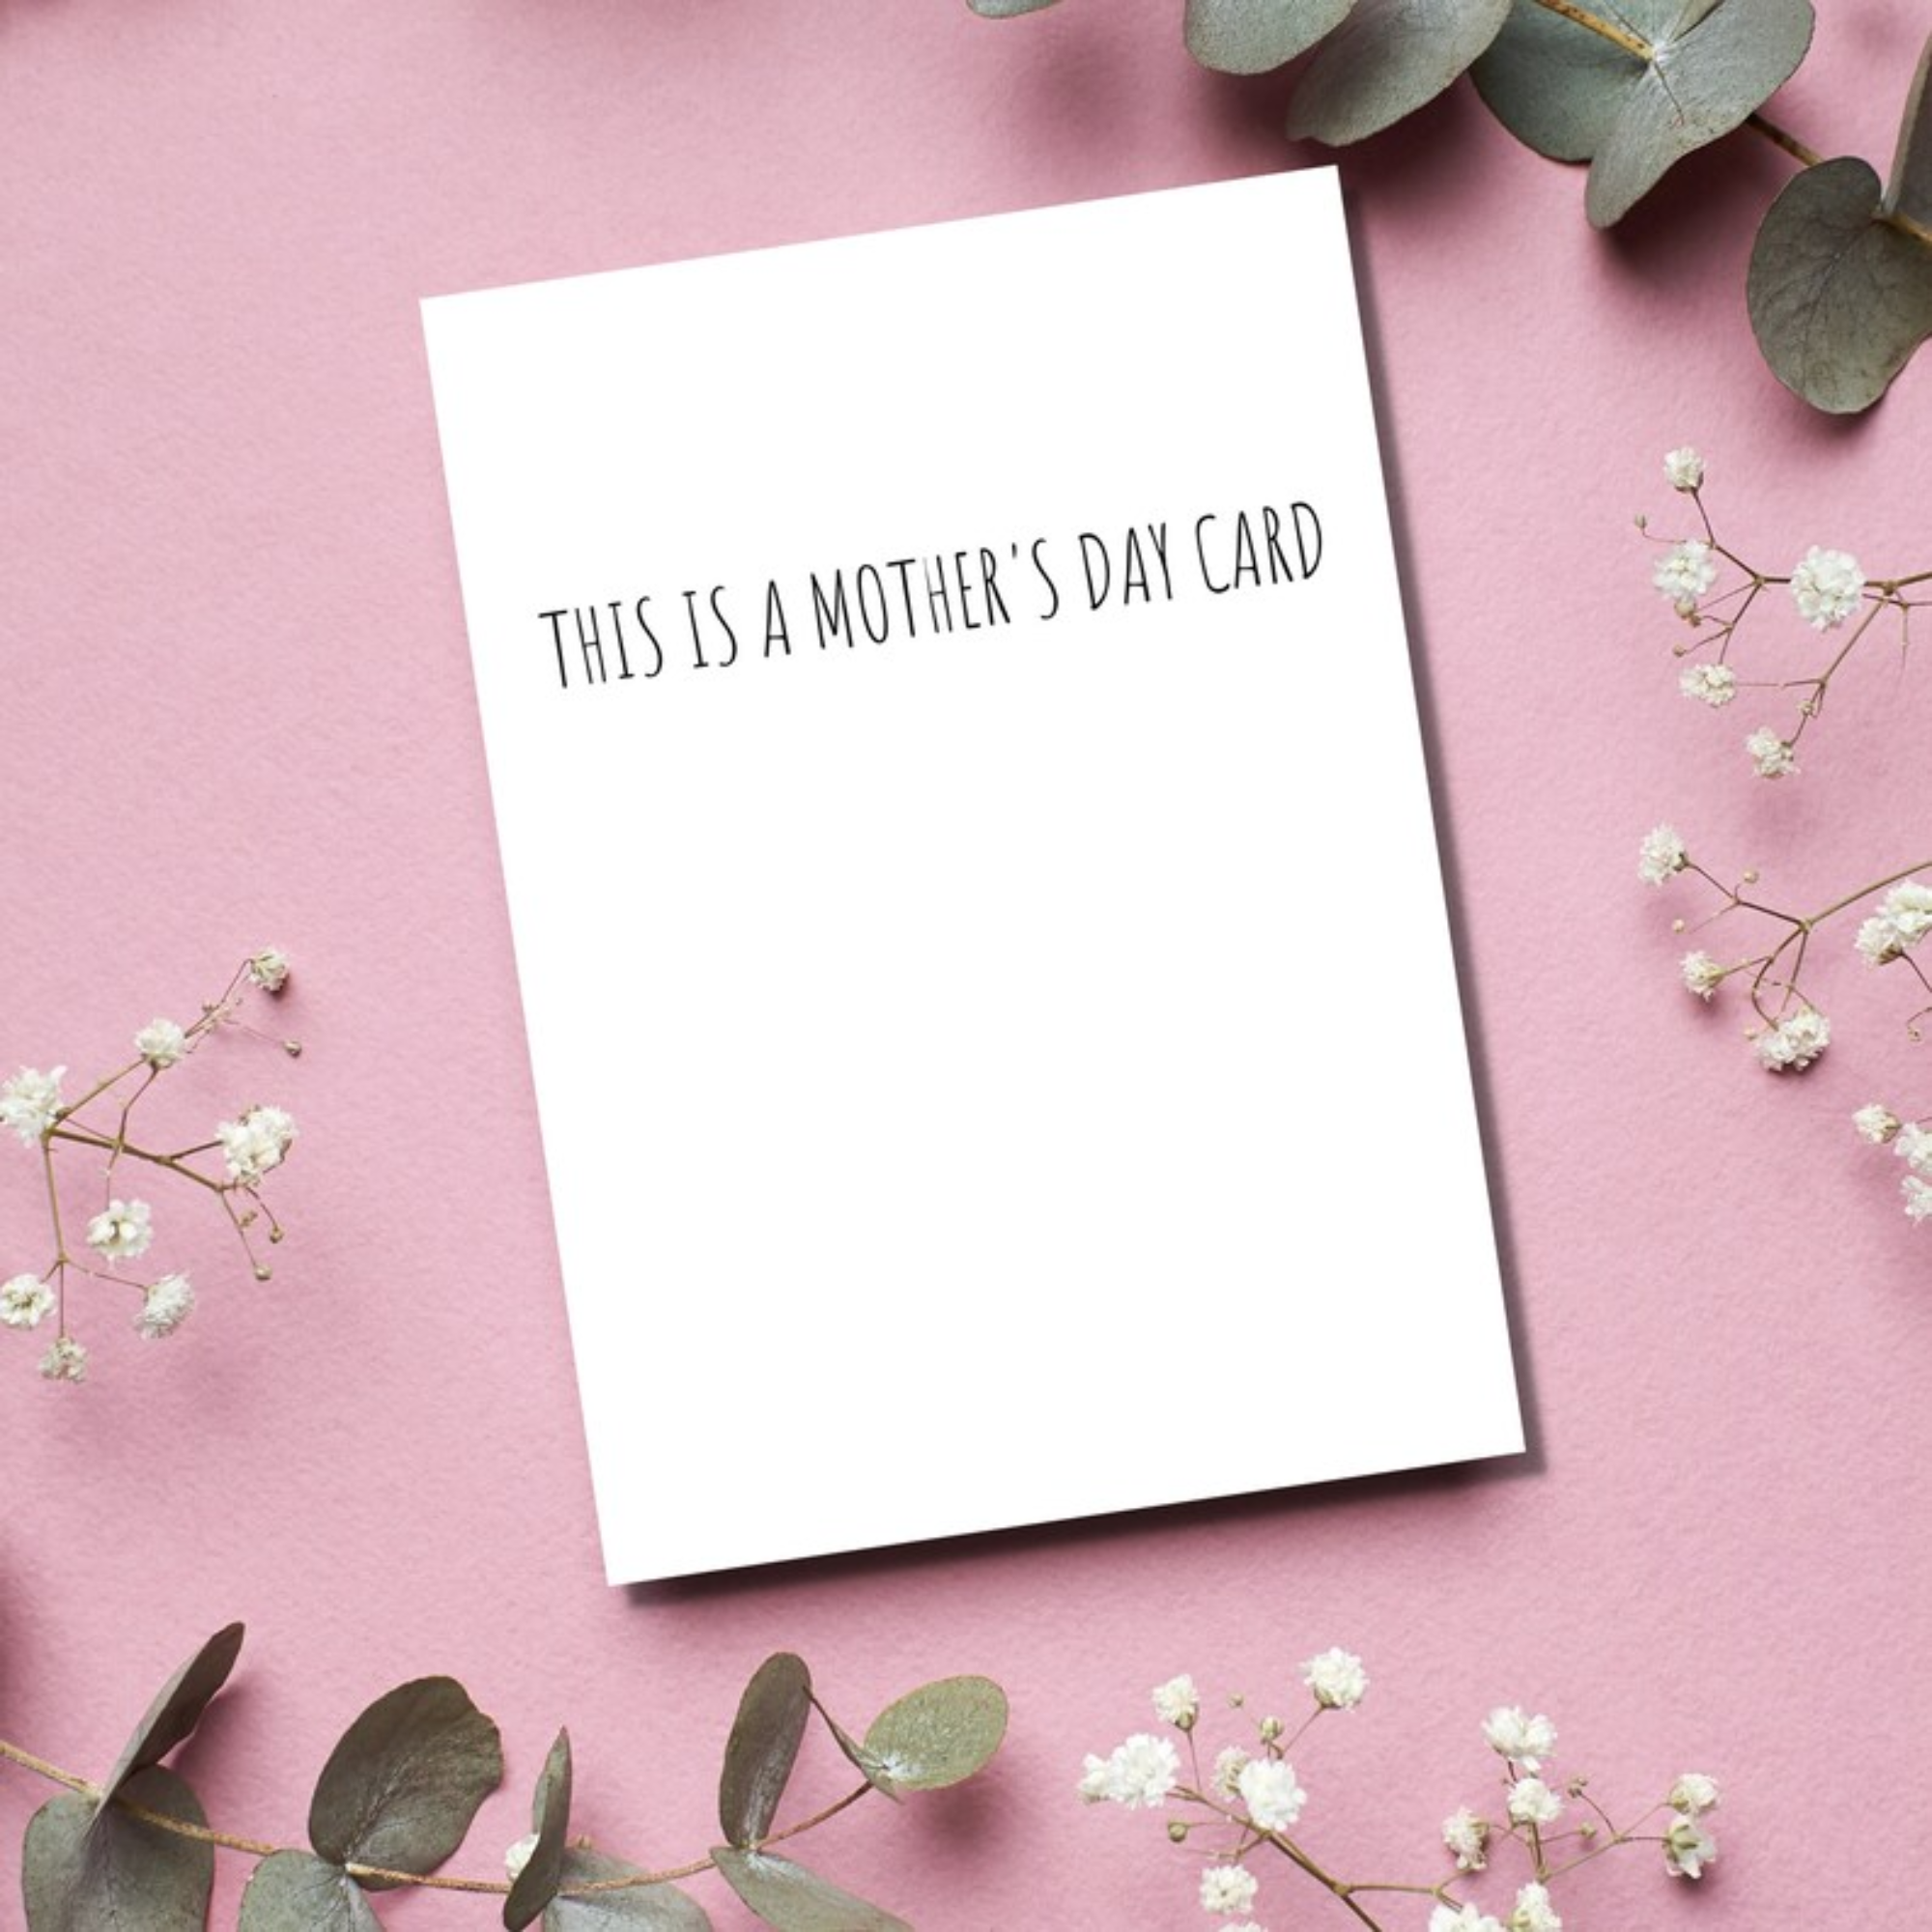 This is a Mother's Day Card